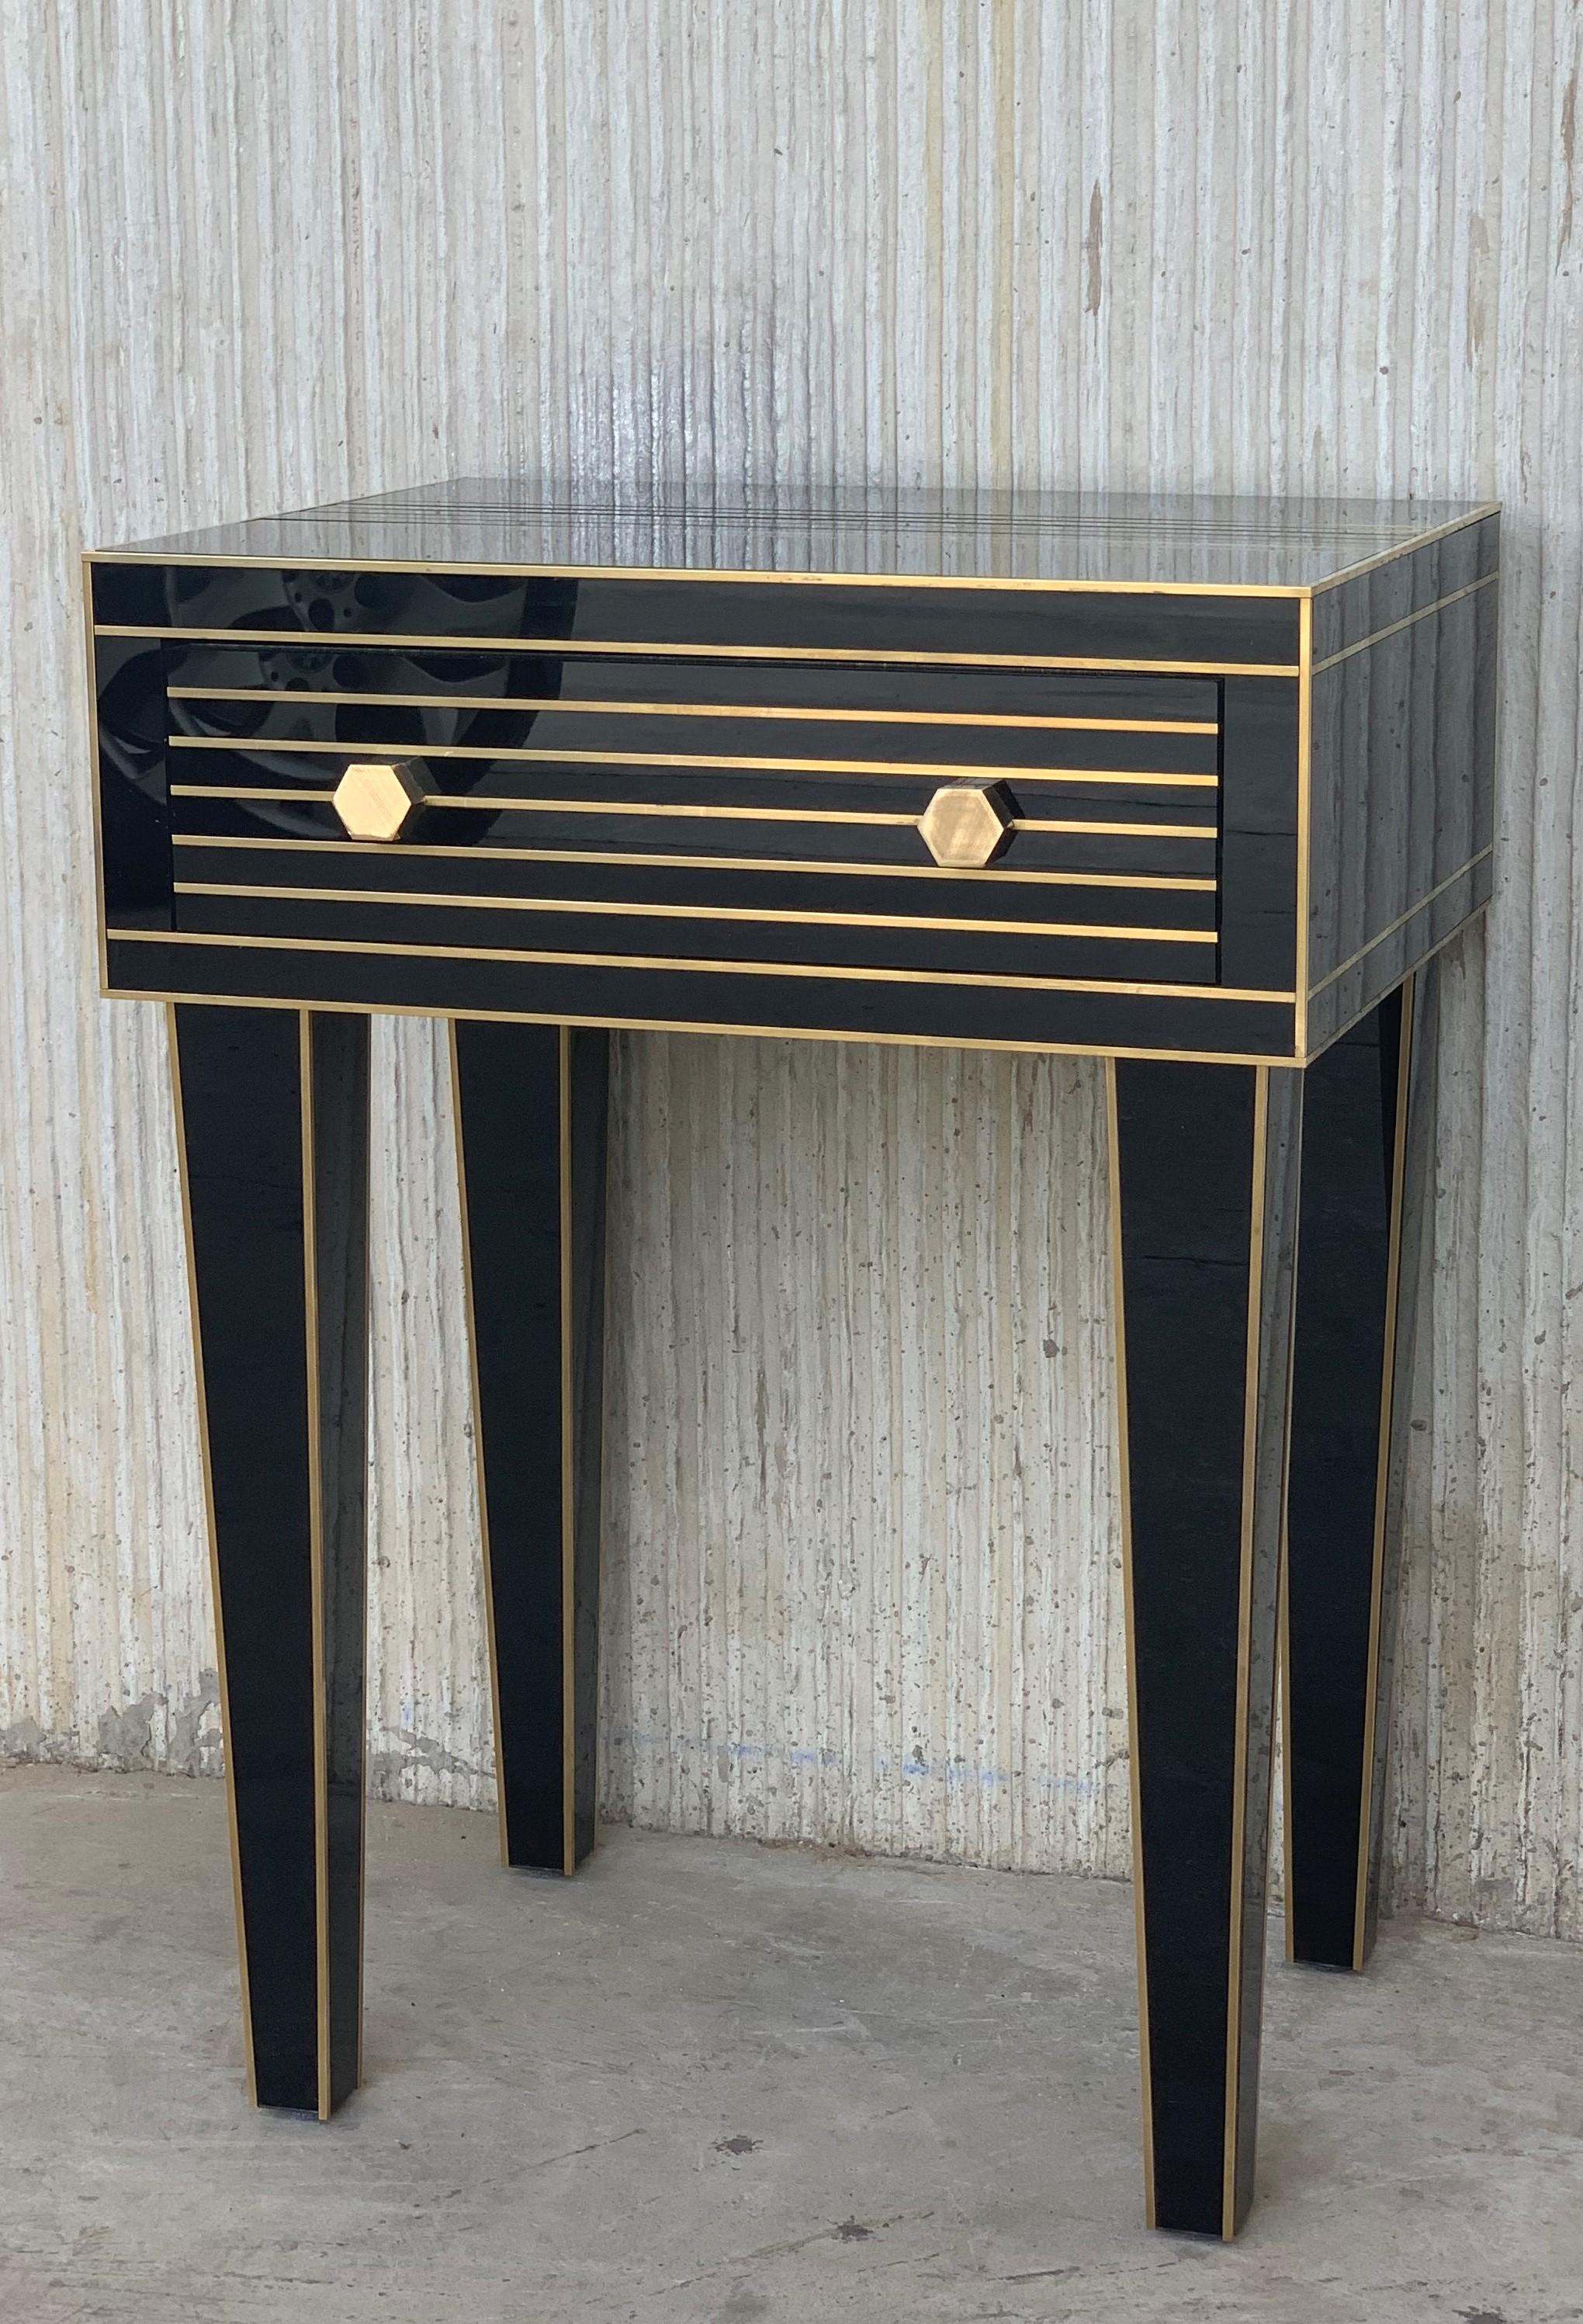 Spanish New Mirrored Nightstand in Black Mirror and Chrome with One Drawer